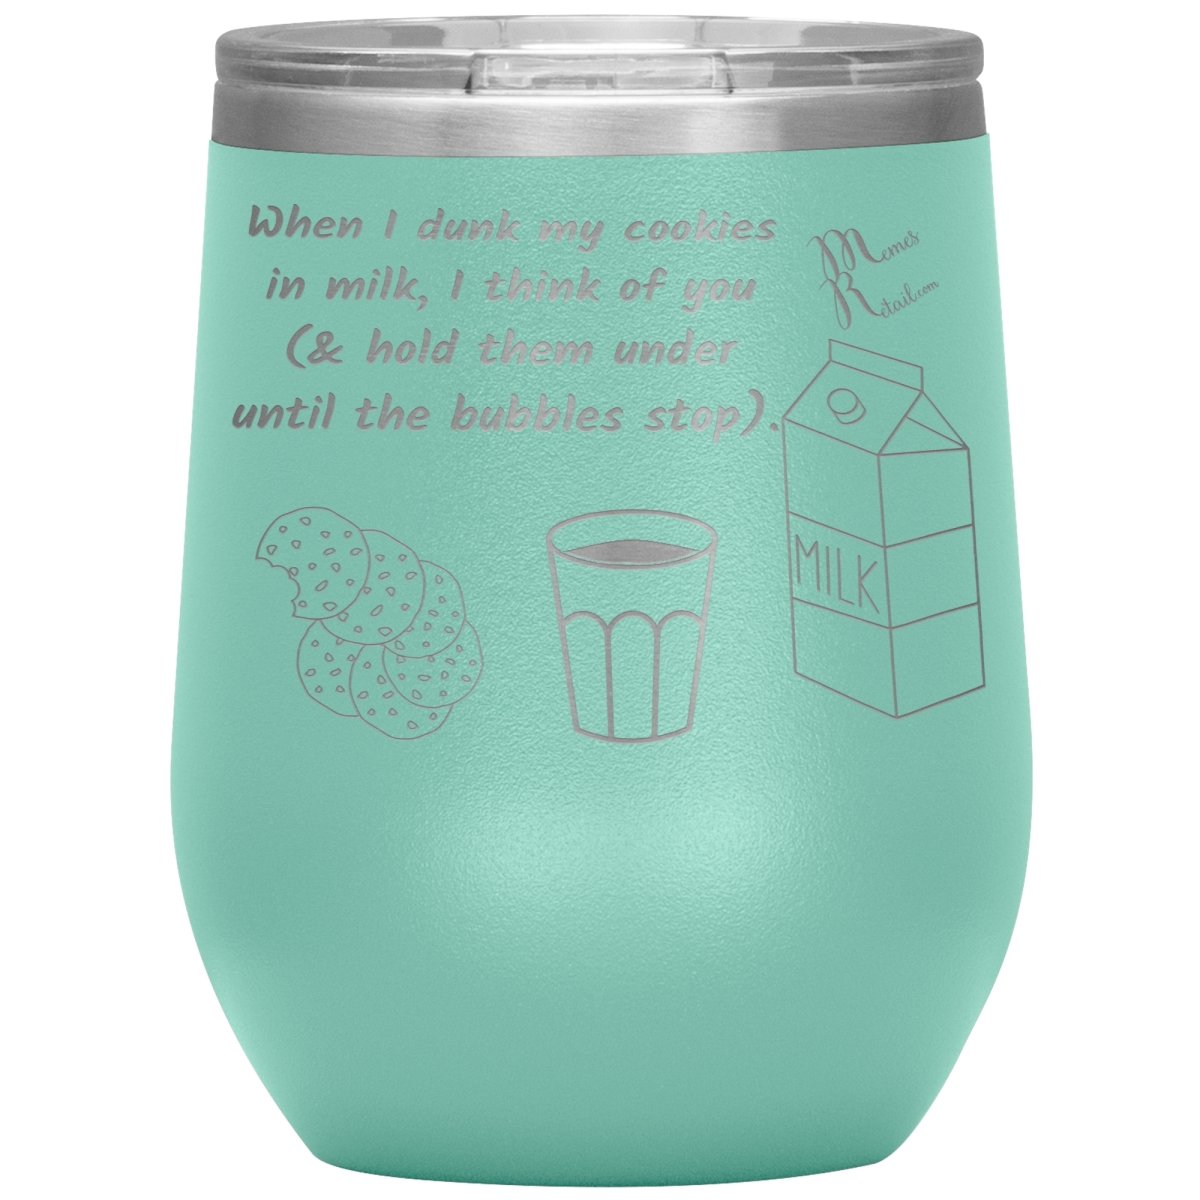 When I dunk My Cookies in Milk, I think of You - Tumblers, 12oz Wine Insulated Tumbler / Teal - MemesRetail.com